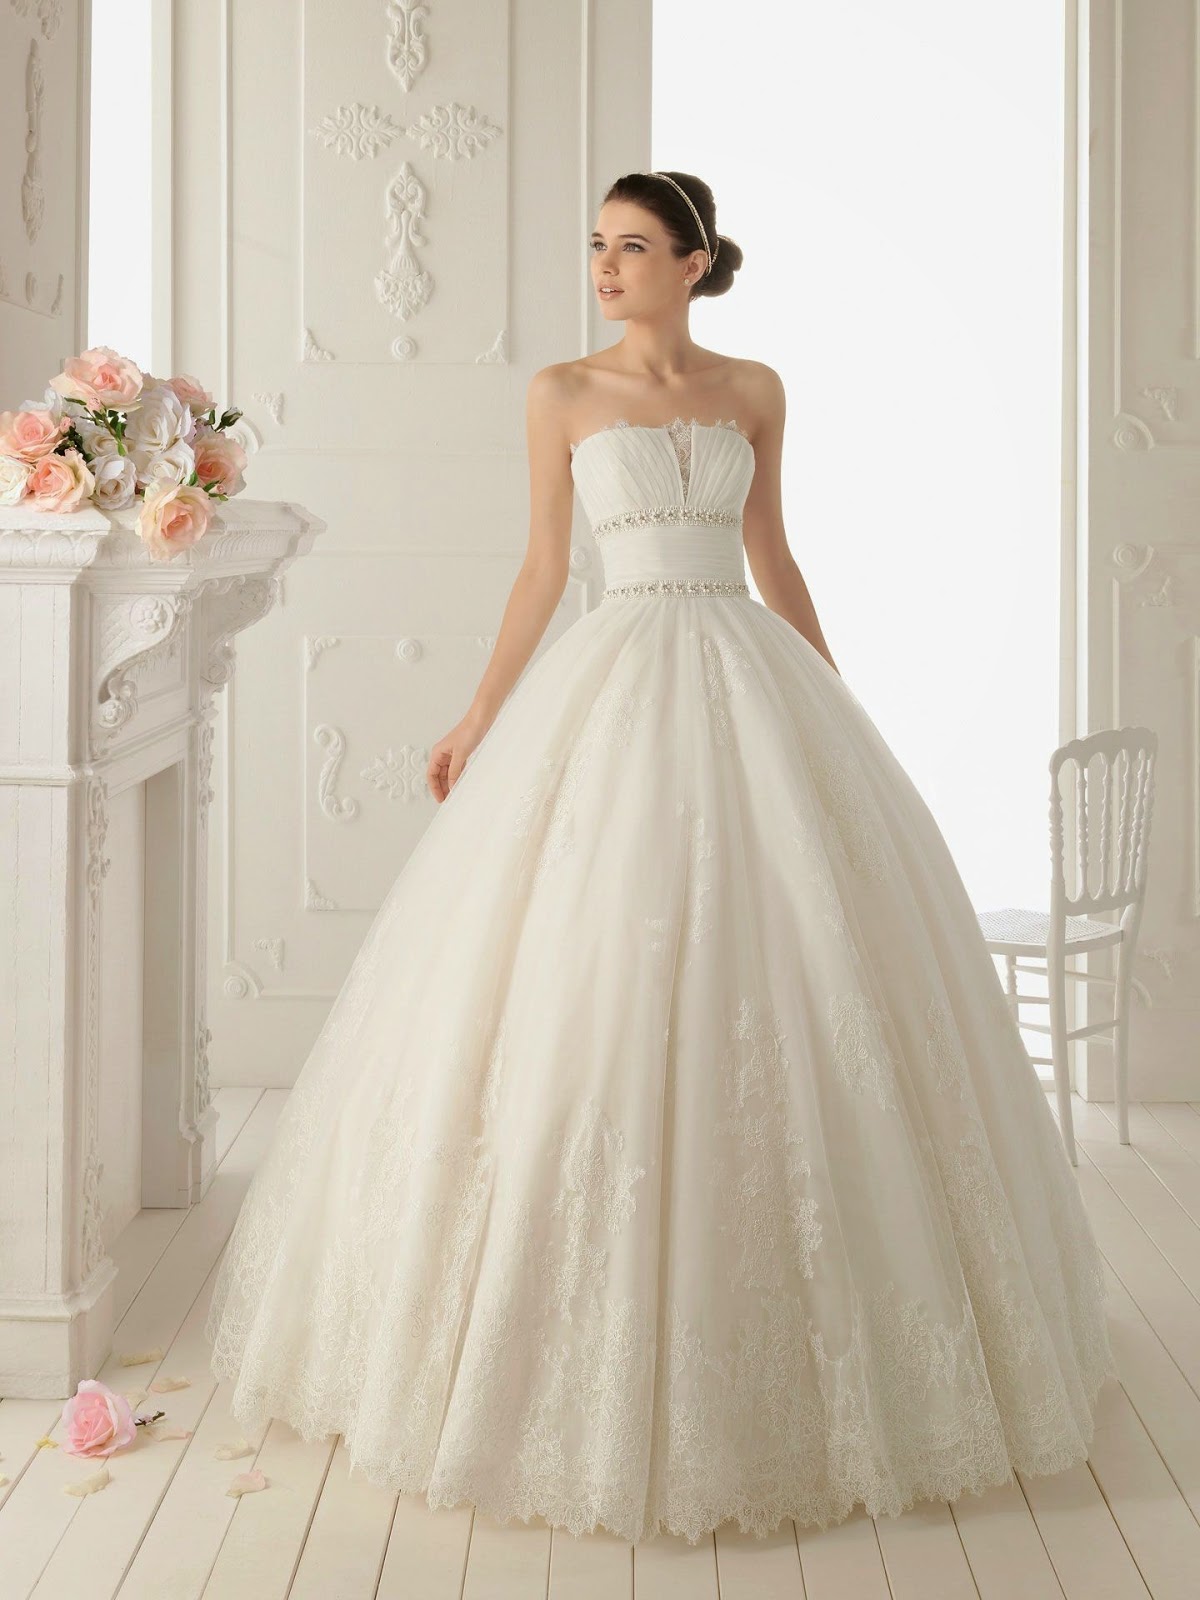 Unique Ball Gown Wedding Dresses Collection # 2 ~ All What Veiled Woman ...